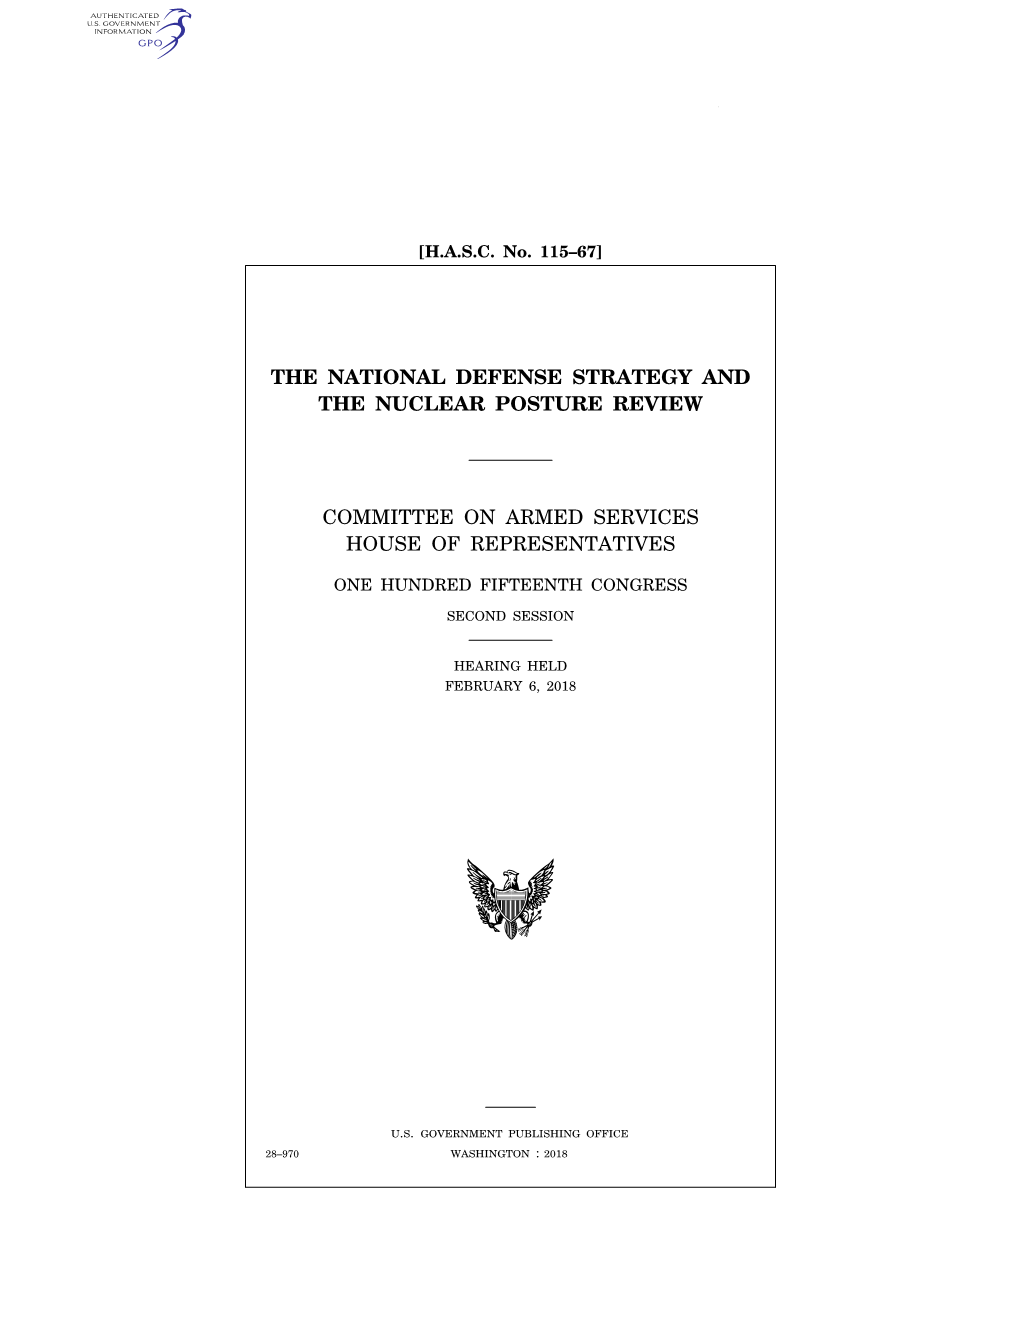 The National Defense Strategy and the Nuclear Posture Review Committee on Armed Services House of Representatives